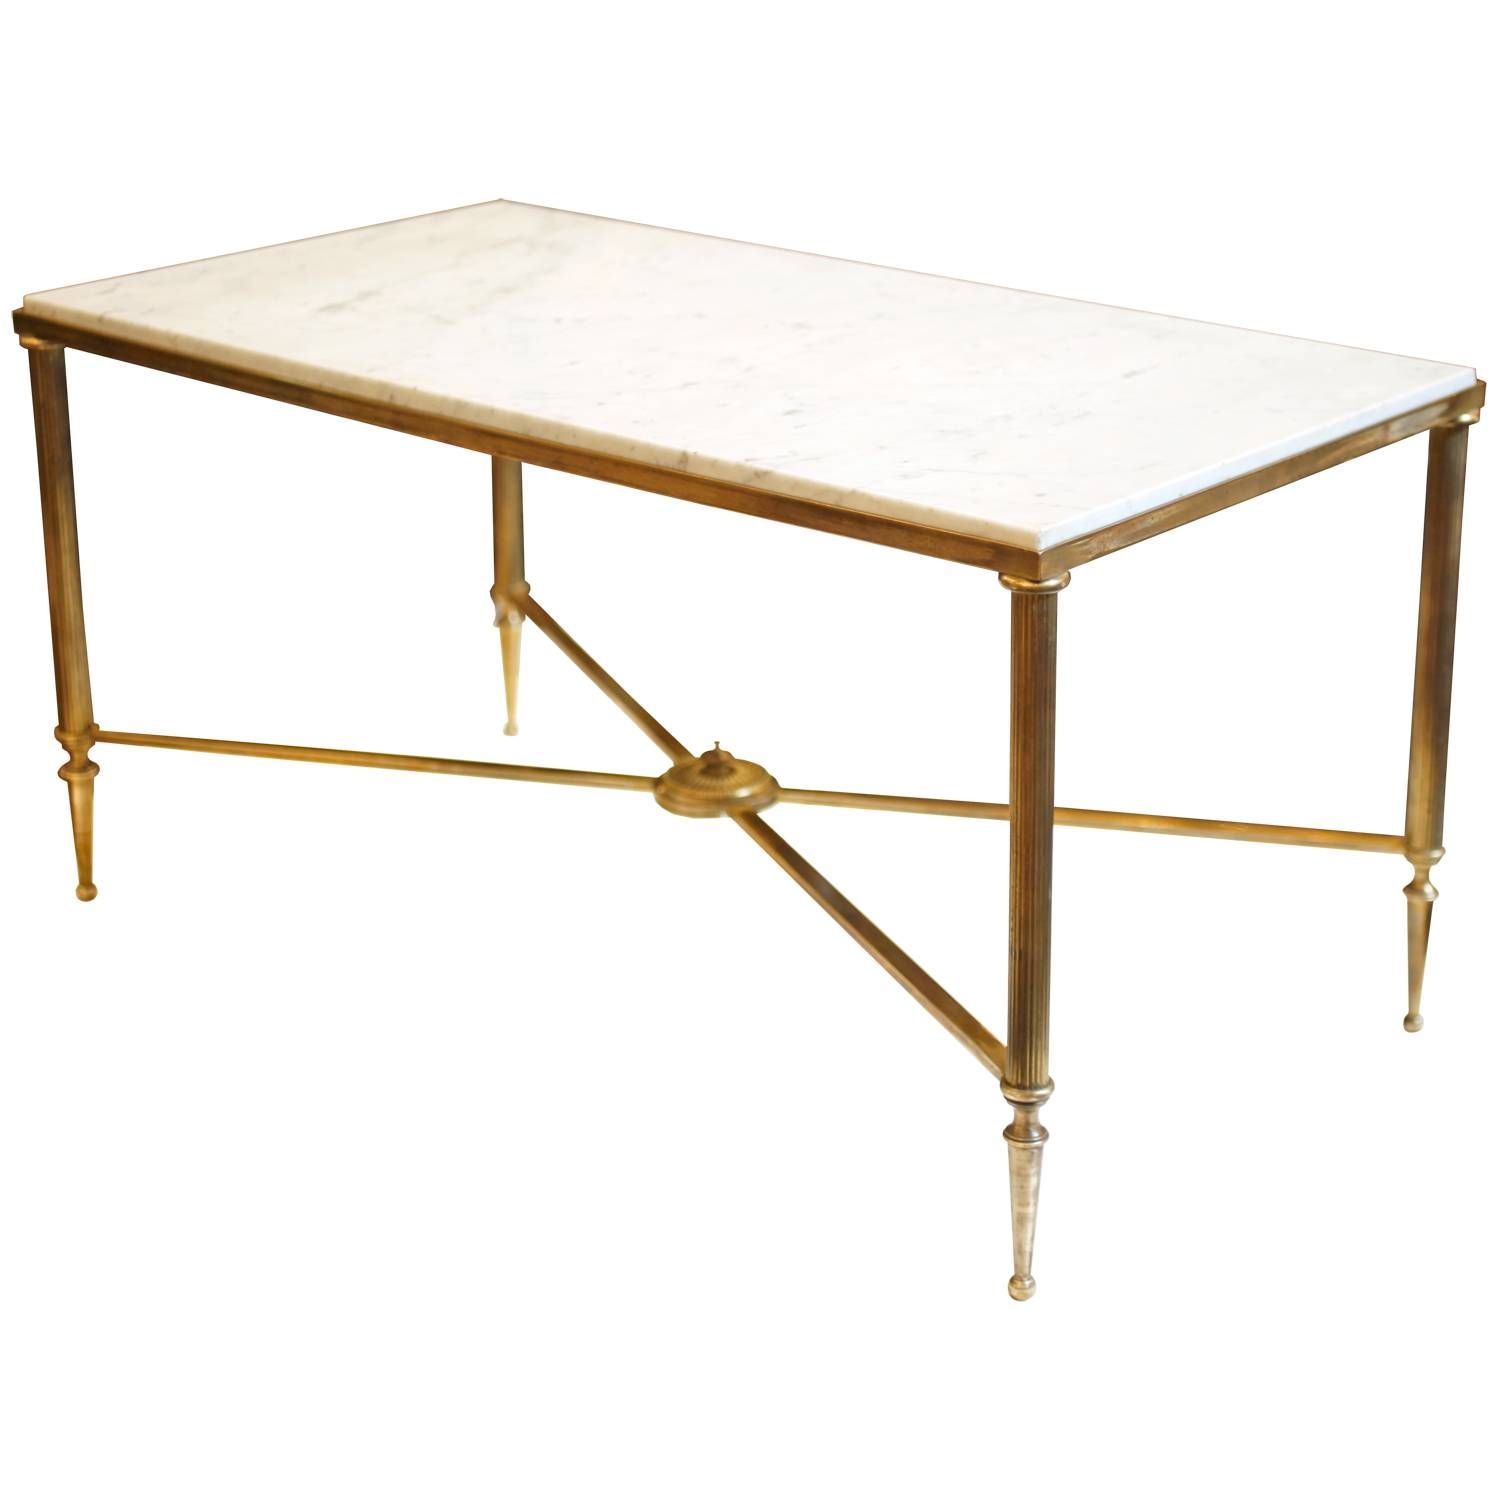 Antique Brass And Glass Coffee Table Within Antique Brass Glass Coffee Tables (View 3 of 37)